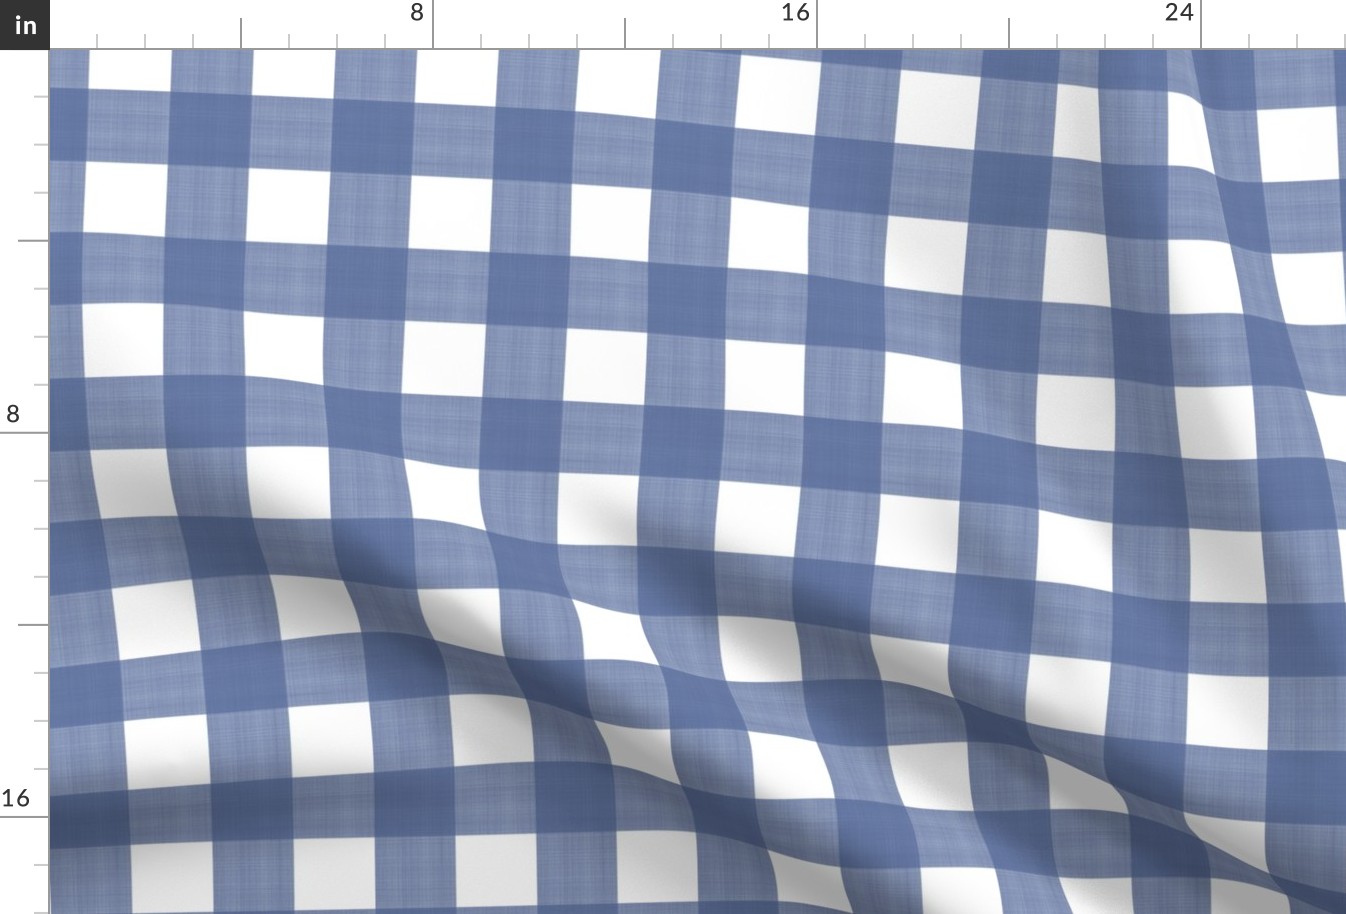 1.5" Periwinkle Blue On white Cross Hatch Plaid